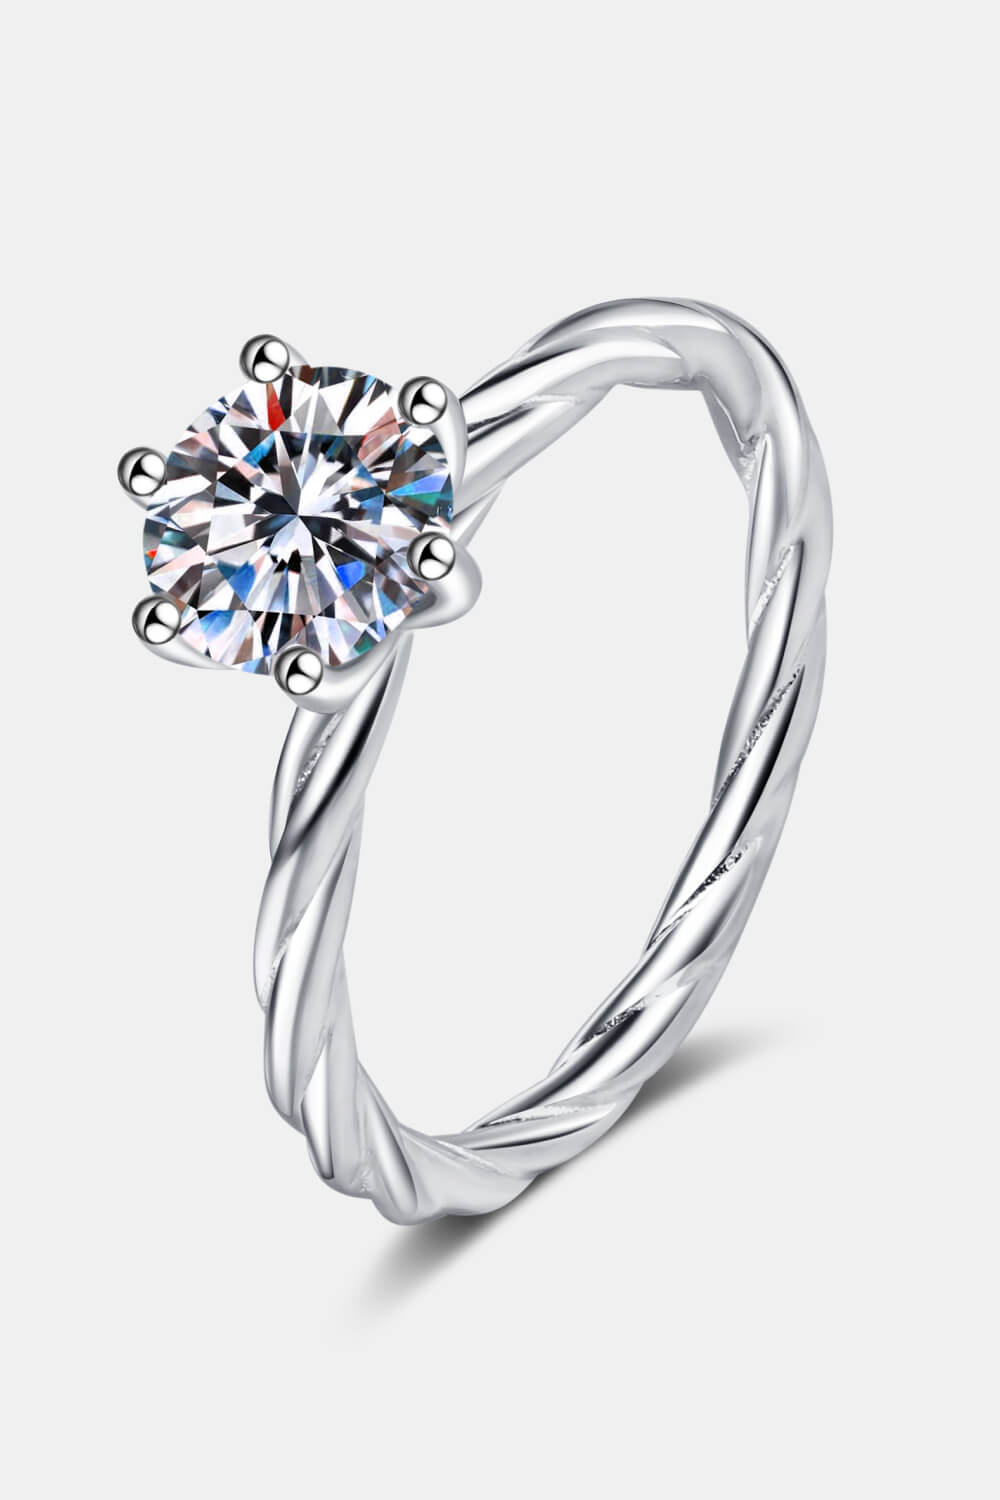 1 Carat Moissanite 6-Prong Twisted Ring - Rings - FITGGINS